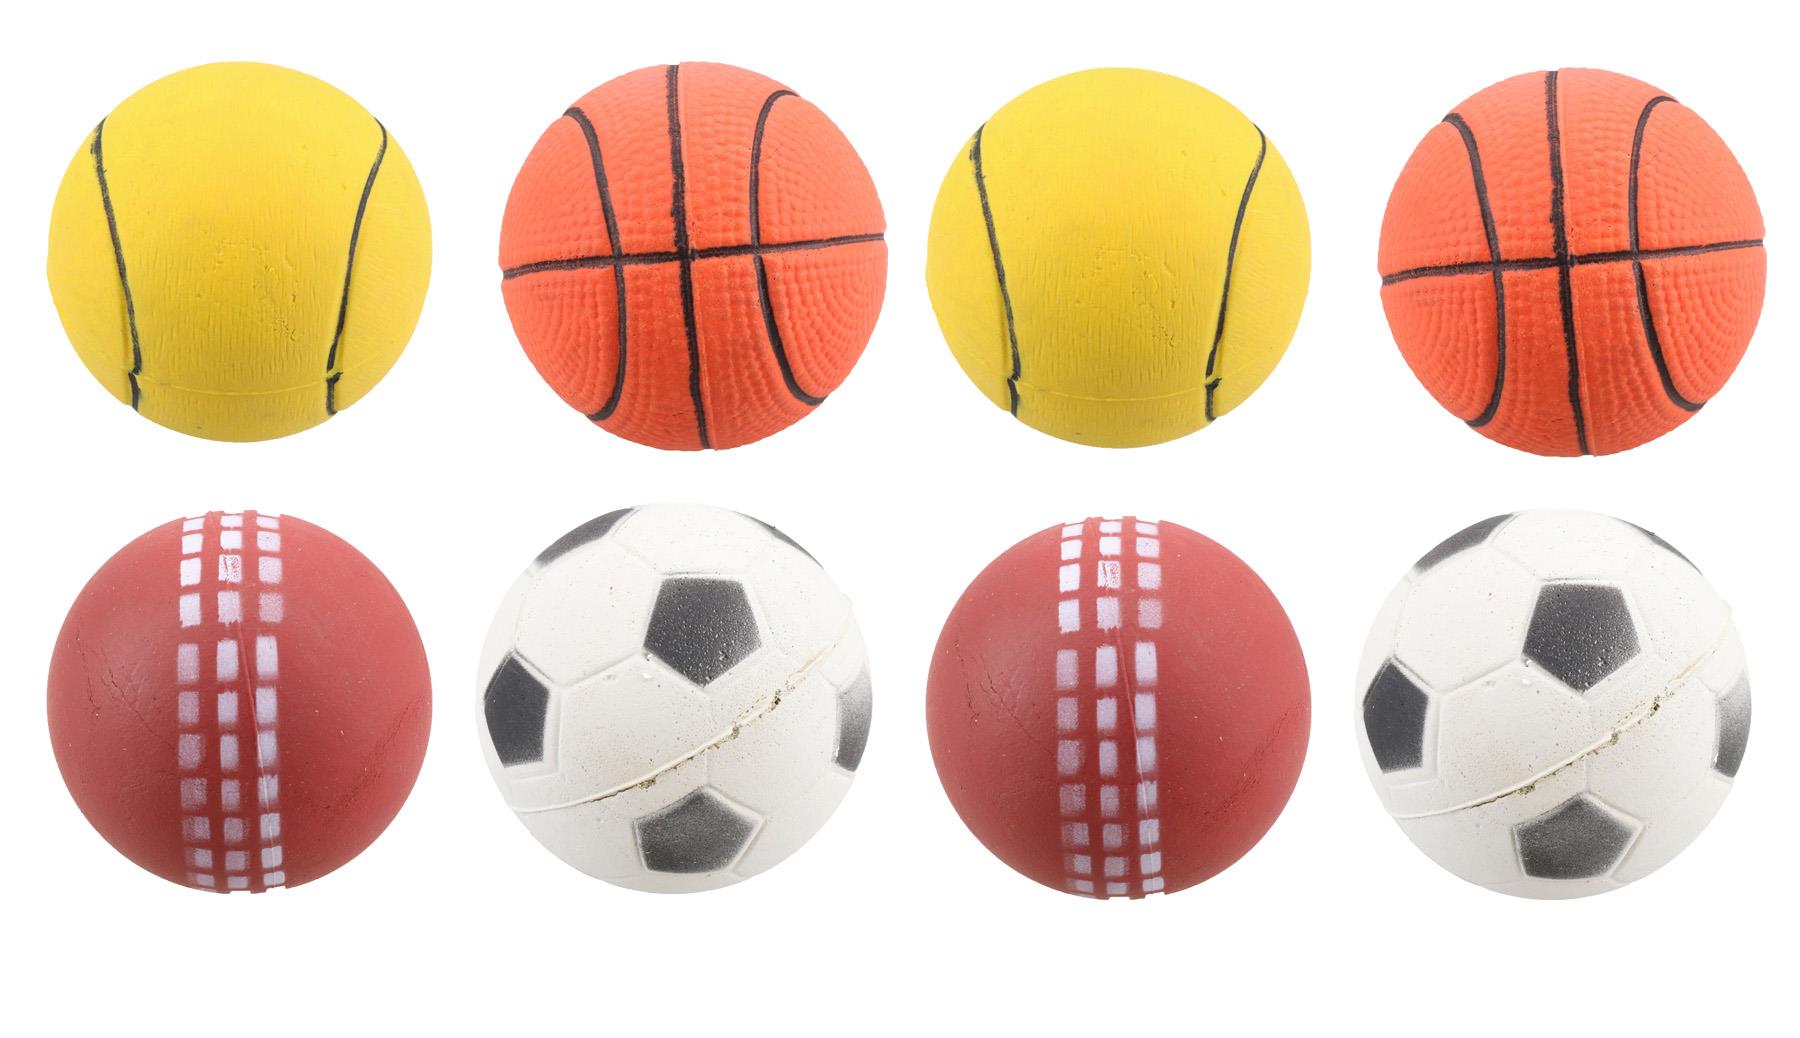 Dog Puppy Play Time Rubber Bouncy Small Sports Ball 6cm 8PK